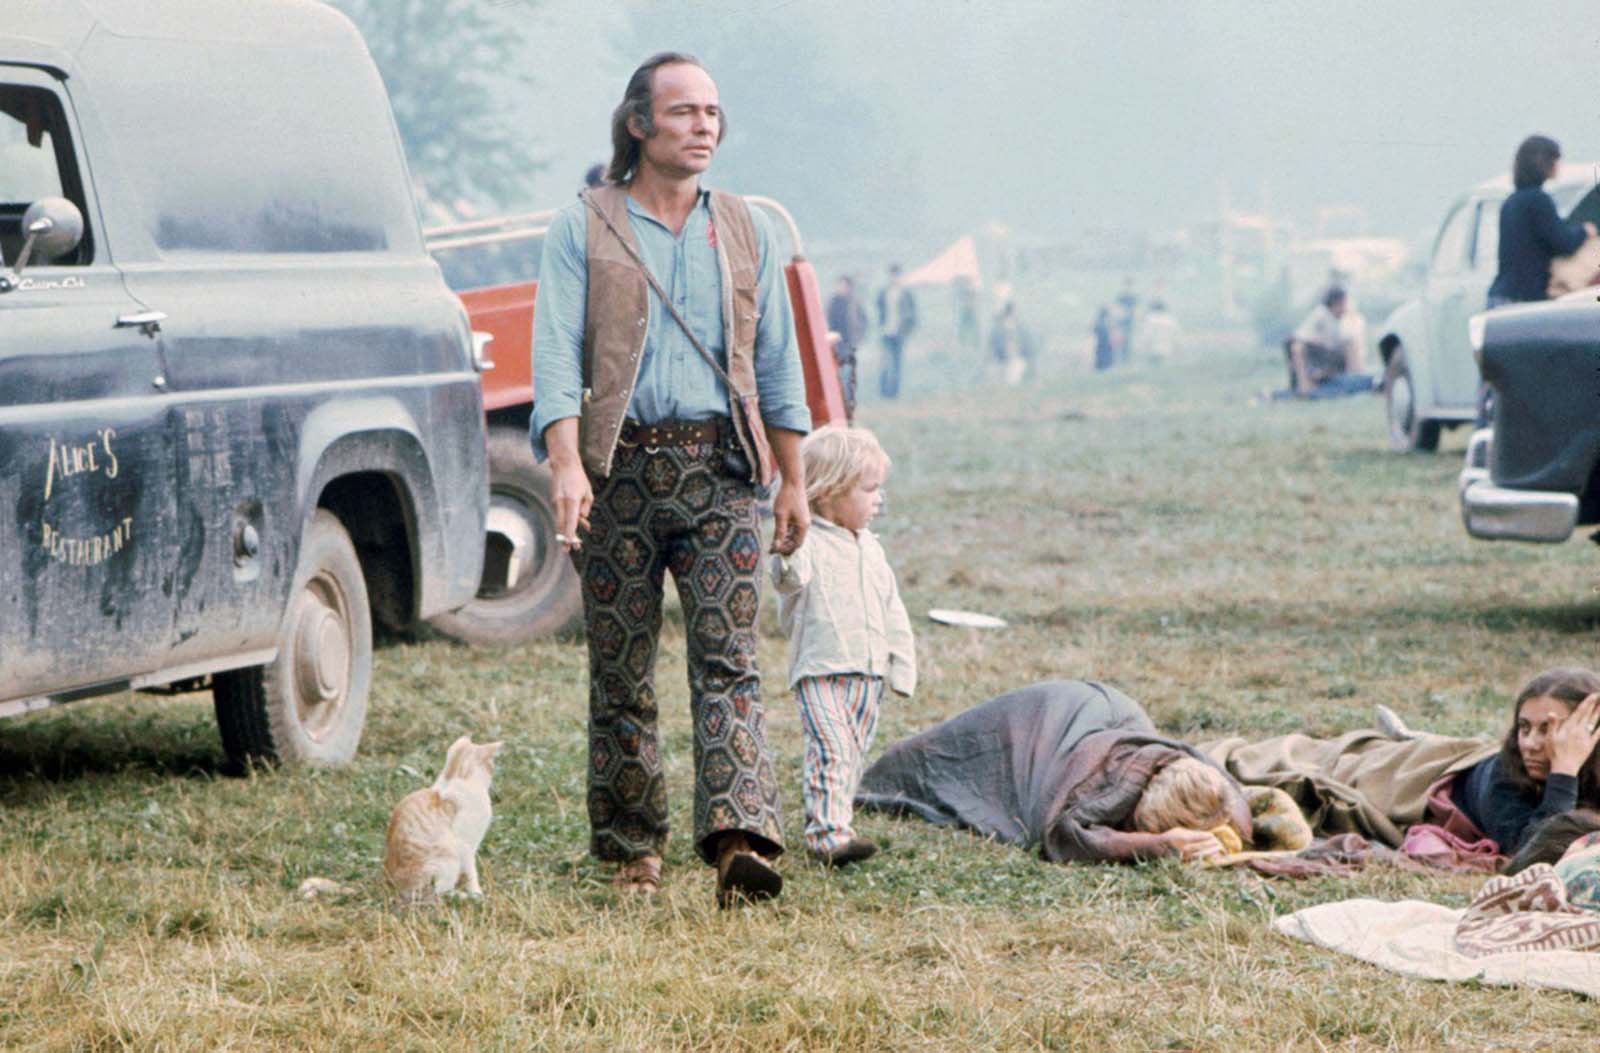 A man and a child walk past people in sleeping bags in August 1969.